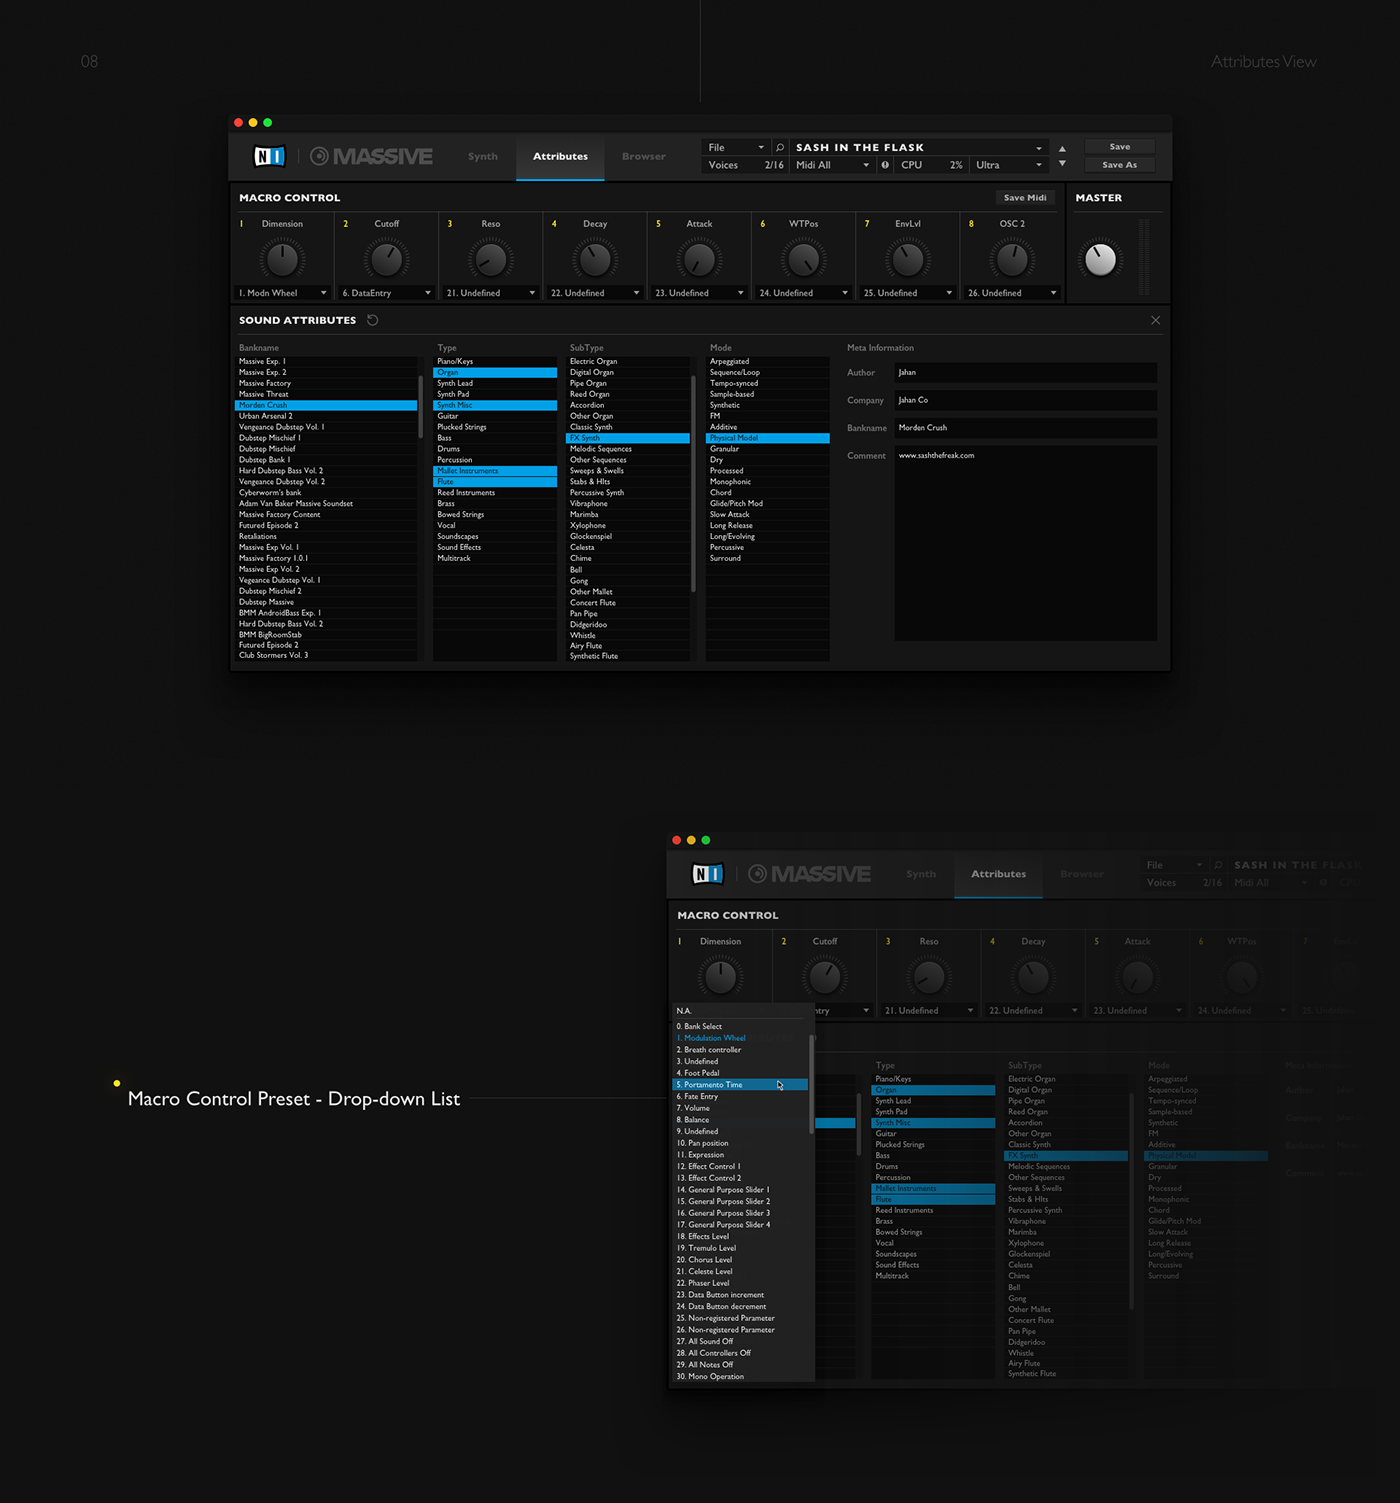 redesign UI ux Interface music darkness